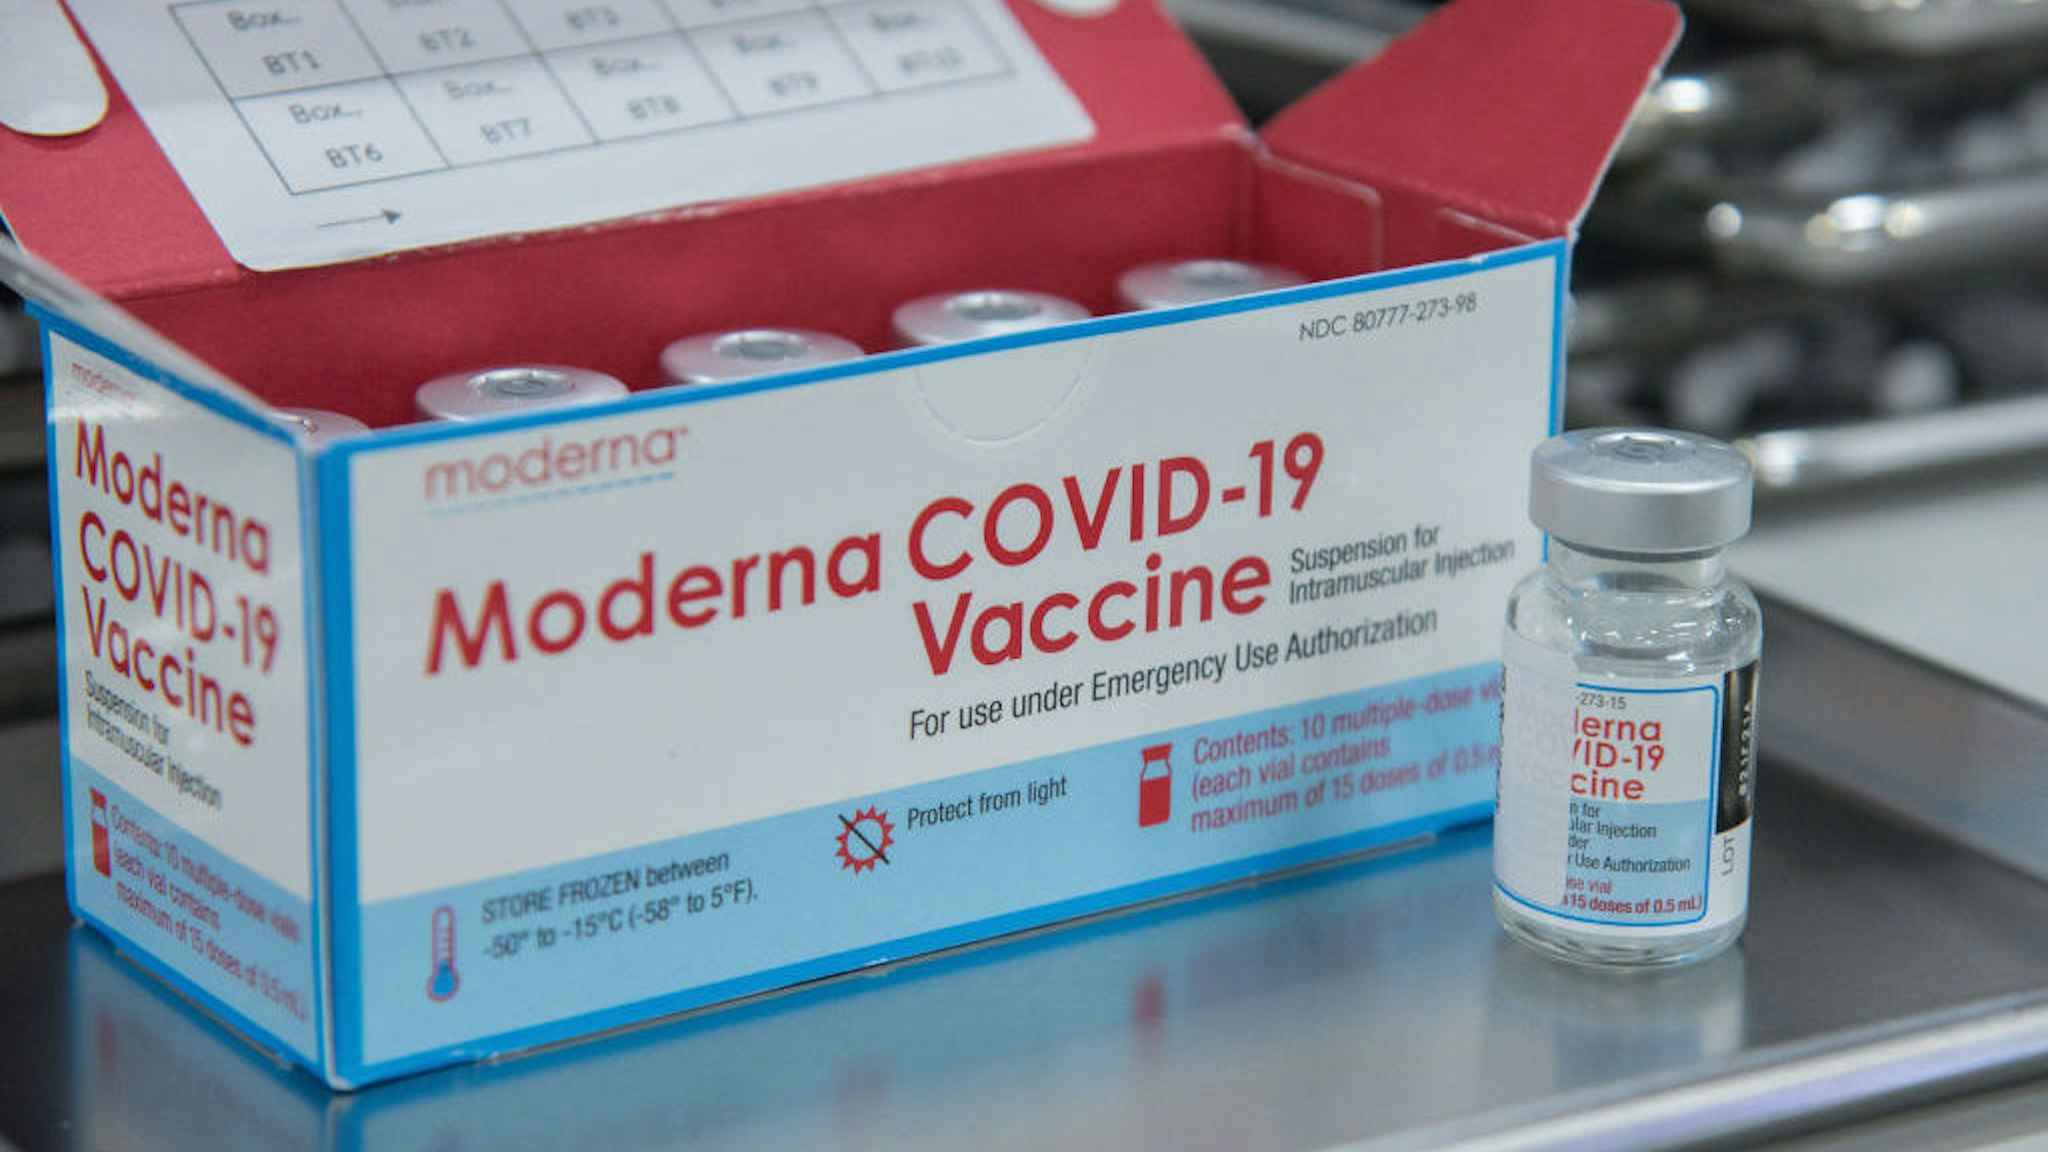 BANGKOK, THAILAND - 2022/01/05: An empty vial of the Moderna Covid-19 vaccine seen next to the box of Moderna Covid-19 vaccine doses during Covid-19 vaccination at the Bang Sue Grand Station in Bangkok. Thailand has accelerated Covid-19 vaccination shots and booster shots to contain the surge of COVID-19 coronavirus infections linked with the Omicron variant after the New Year holiday. Thailand's Ministry of Health reported that more than 2,338 cases of Omicron had been discovered in Thailand. (Photo by Peerapon Boonyakiat/SOPA Images/LightRocket via Getty Images)